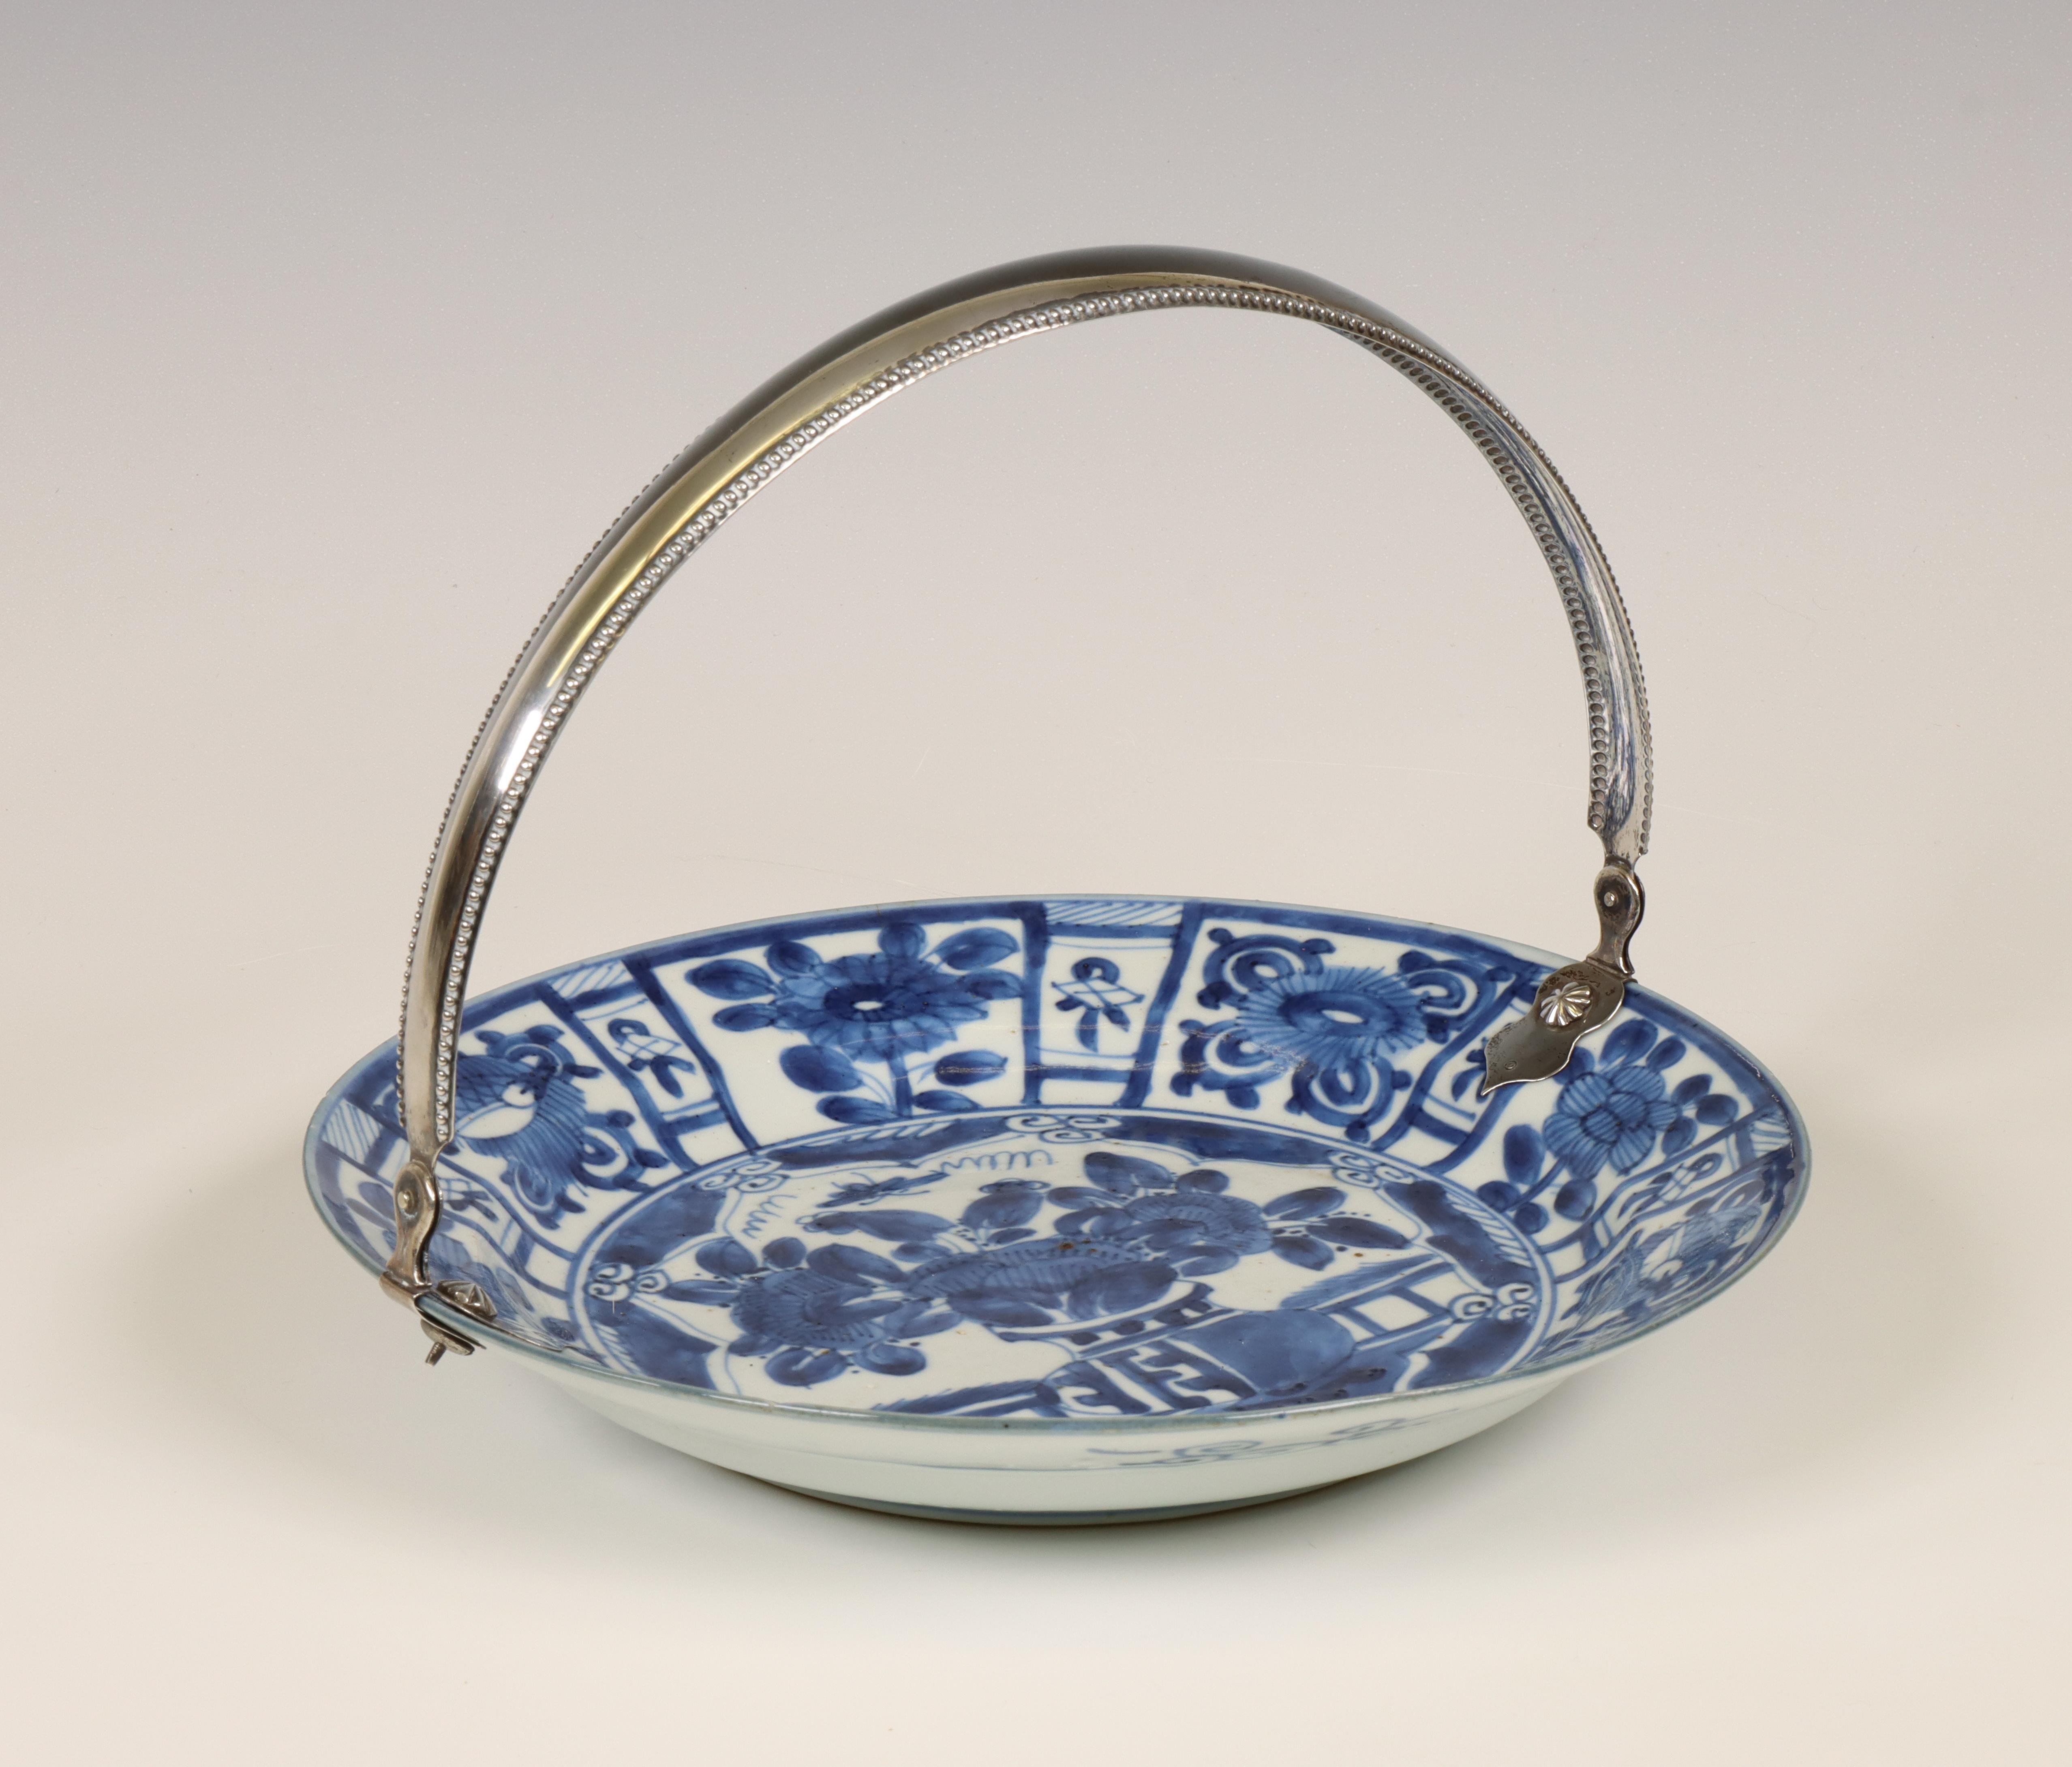 China, silver-mounted blue and white porcelain dish, ca. 1700, the Dutch silver 19th century,